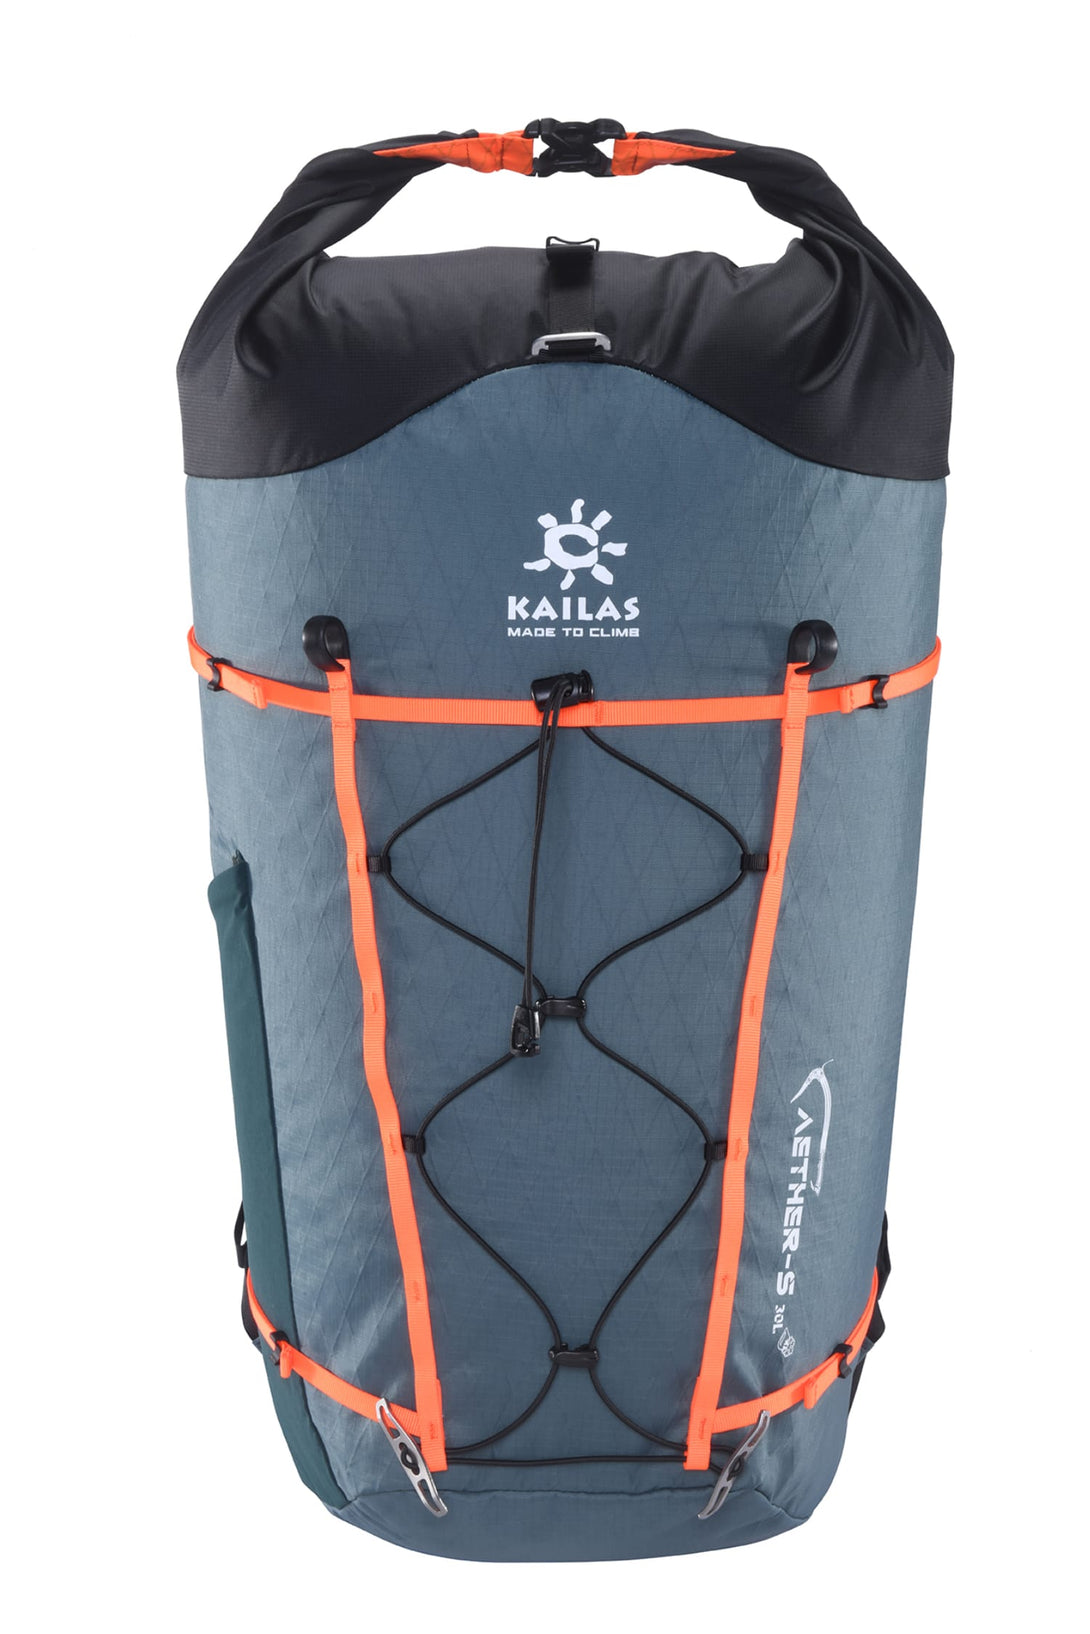 Kailas AETHER Sport 30L Technical Alpine Climbing Backpack